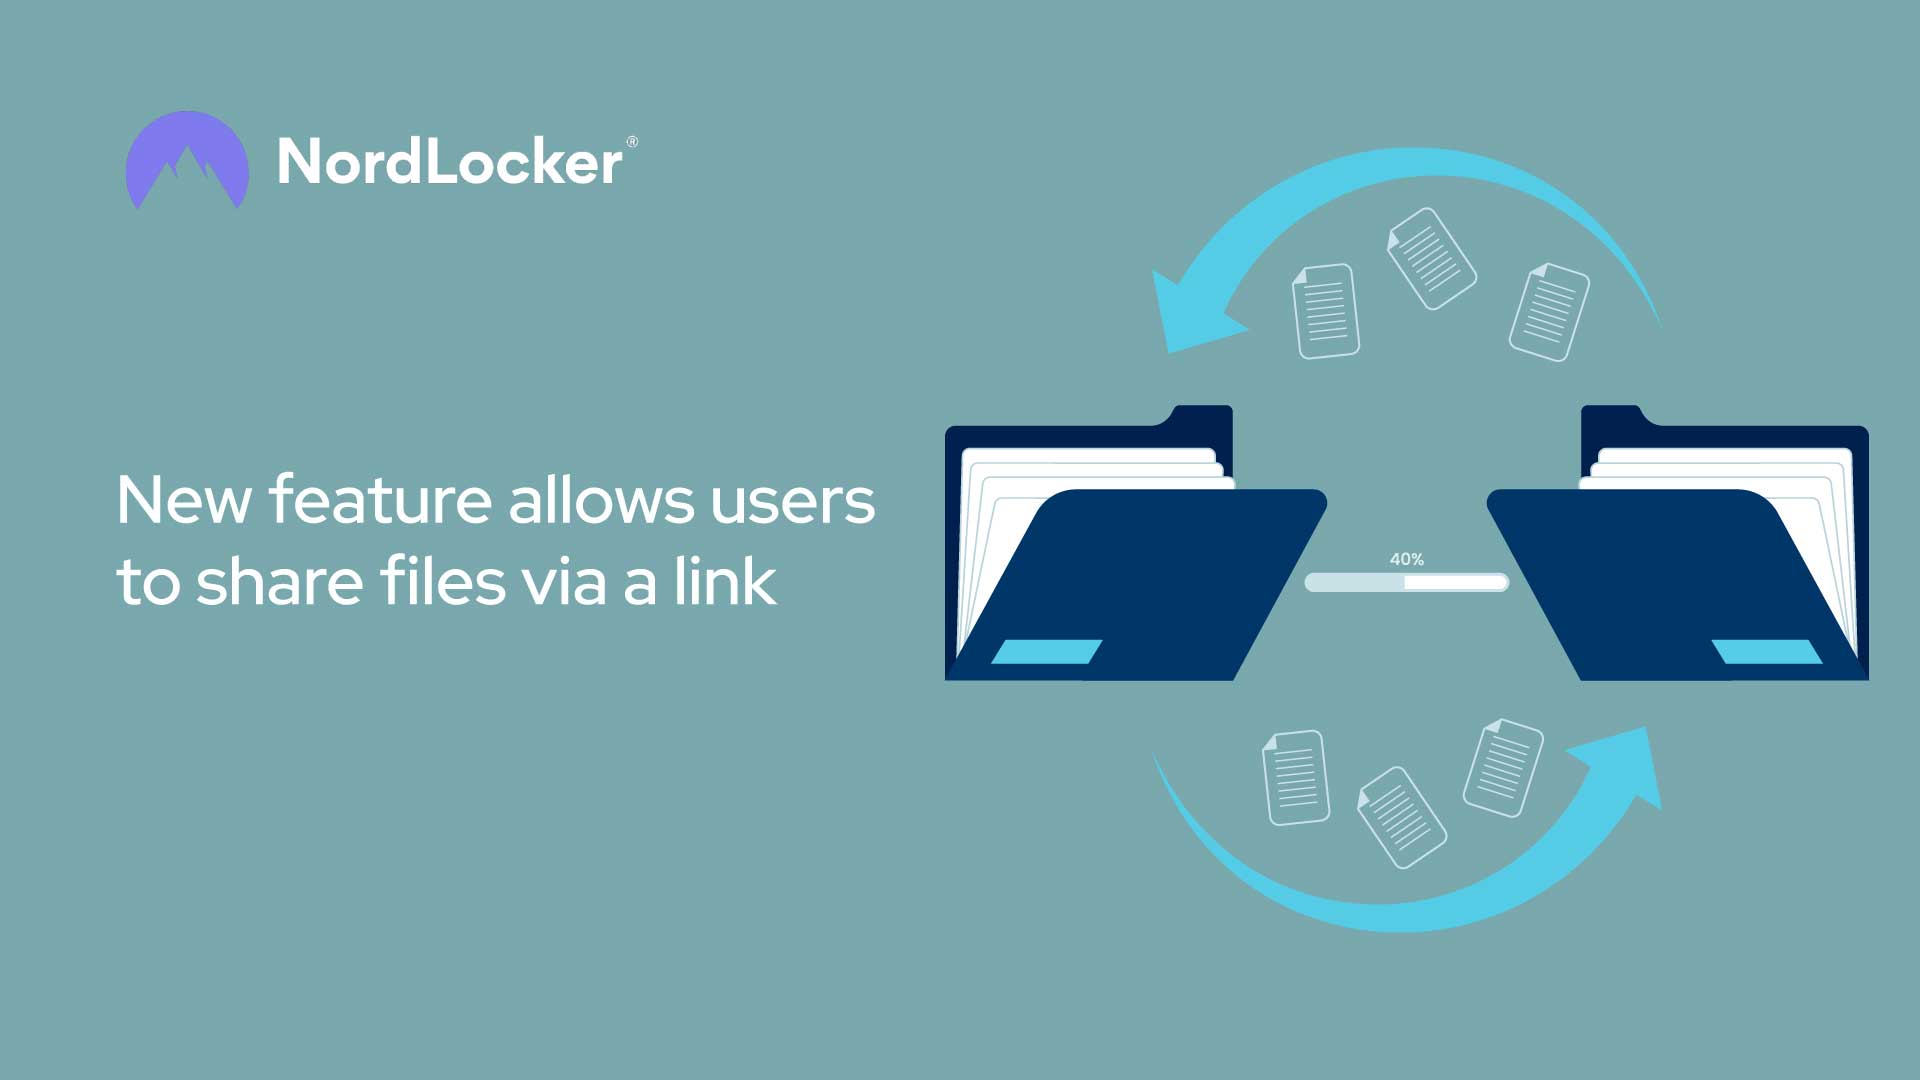 NordLocker’s new feature allows users to share files via a link